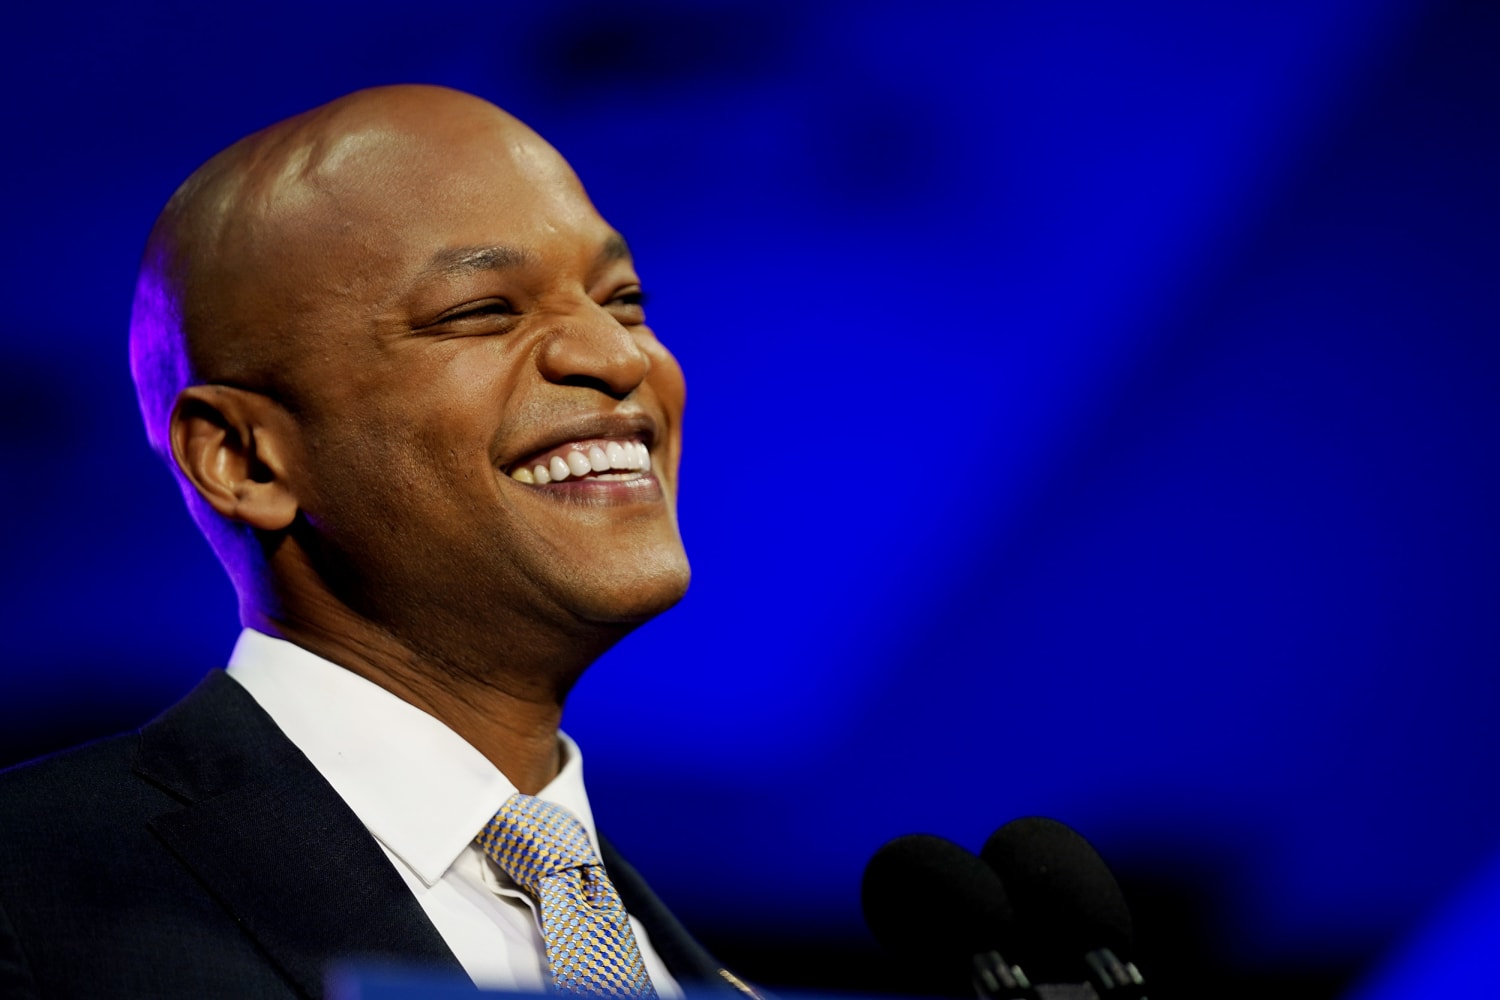 Wes Moore made Black gubernatorial history. But a glass ceiling remains.